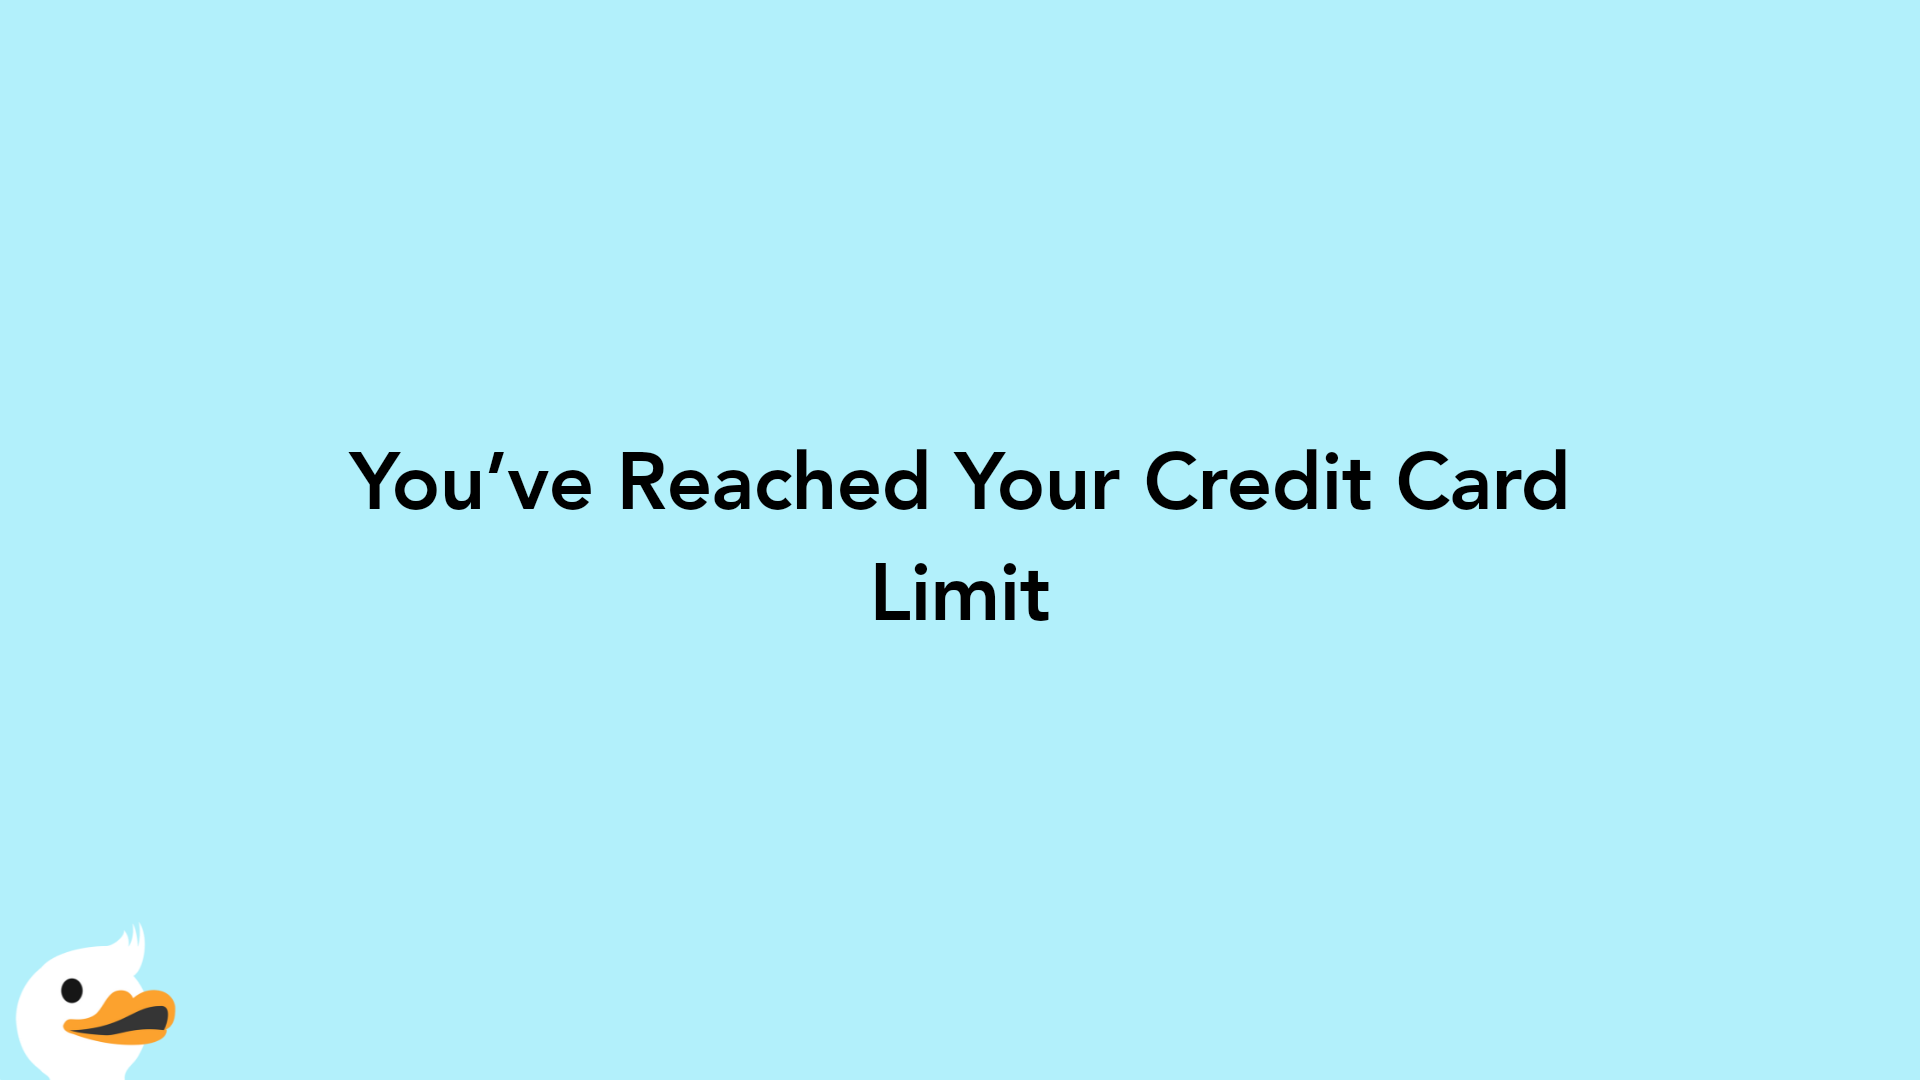 You’ve Reached Your Credit Card Limit